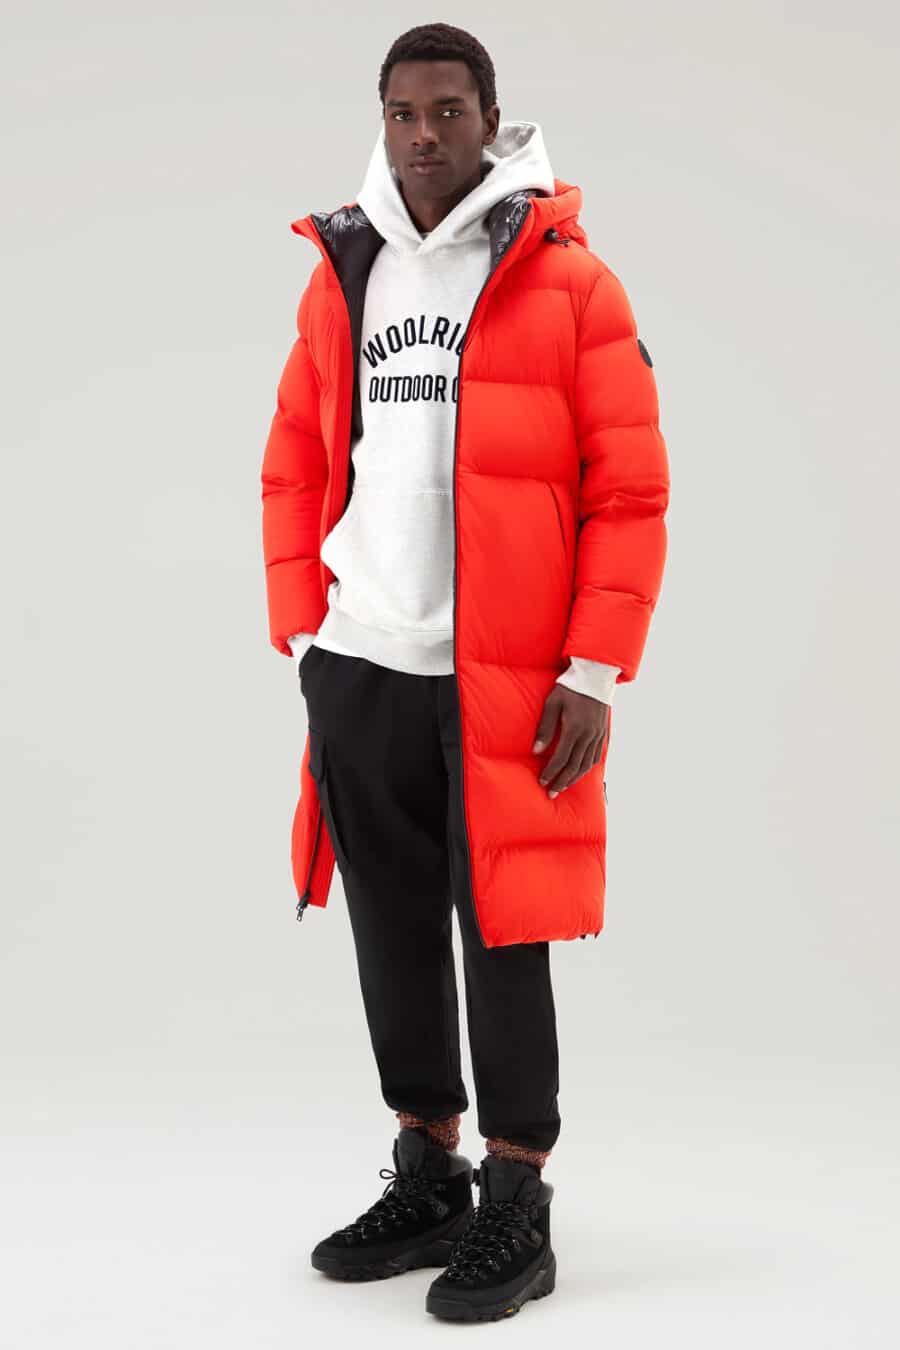 Men's black cargo pants, white logo hoodie, long length bright red puffer jacket, orange marl hiking socks and black hiking boots outfit